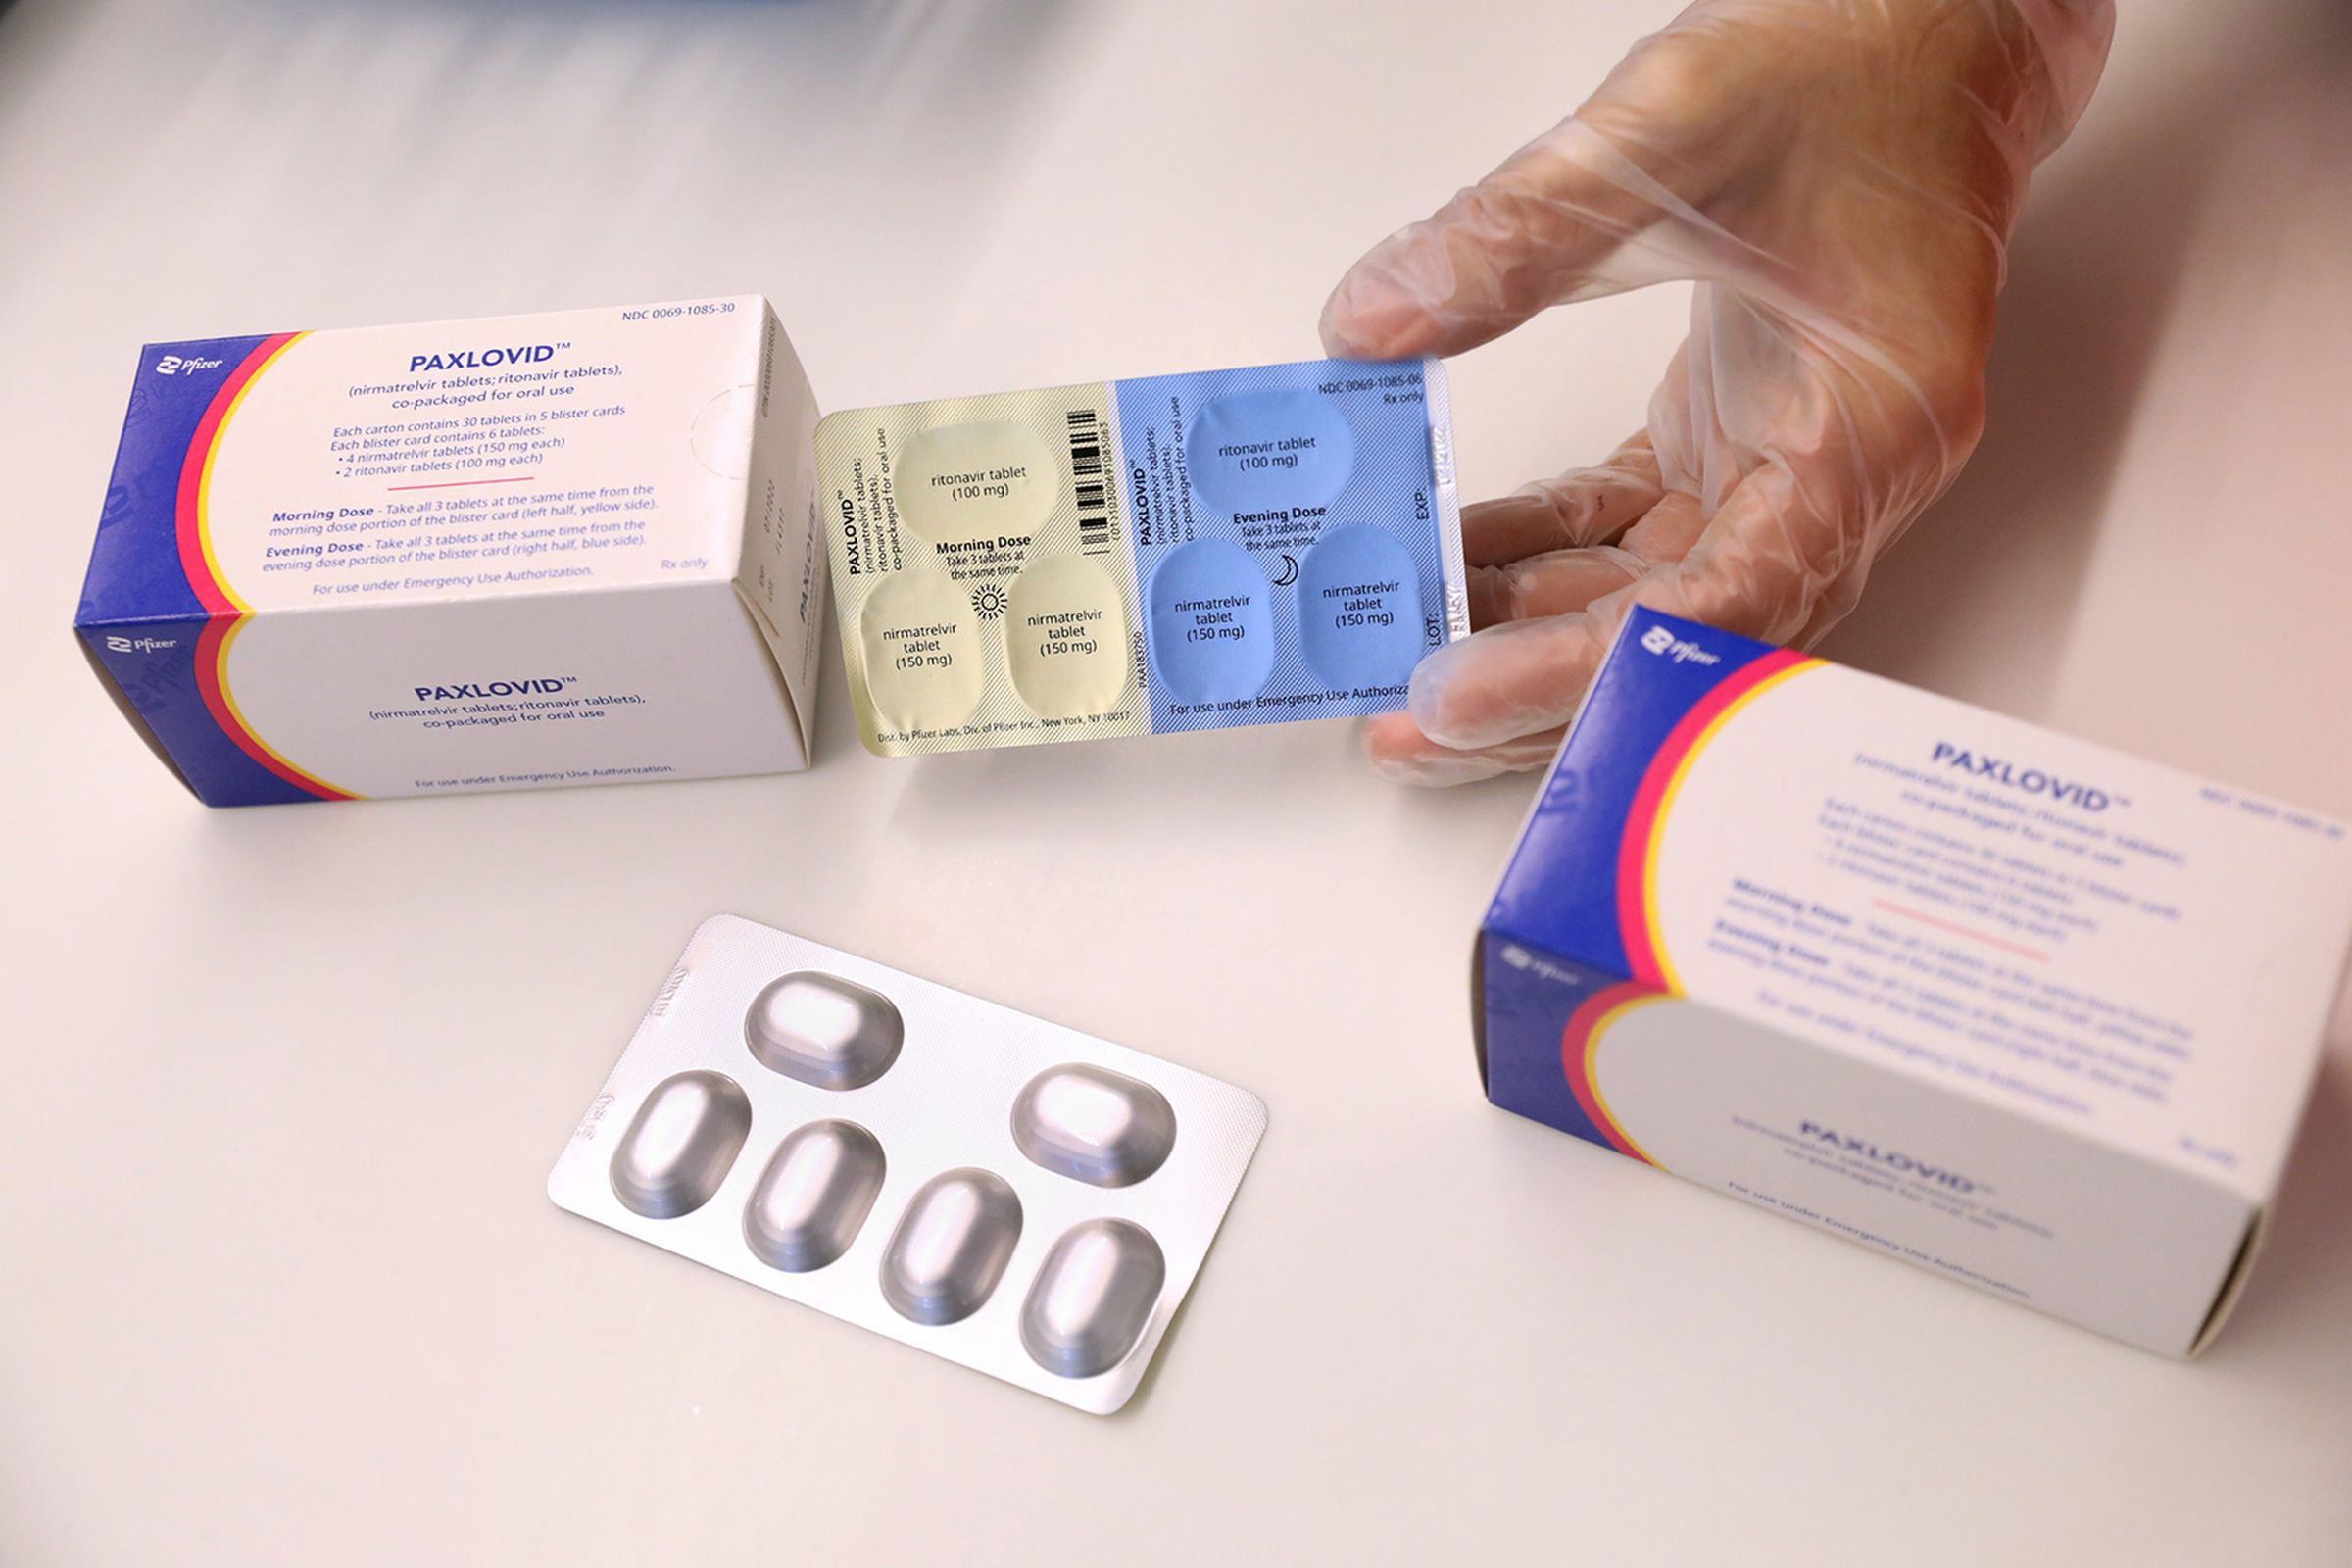 A gloved hand pulling a pill pack out of a box labeled “paxlovid”